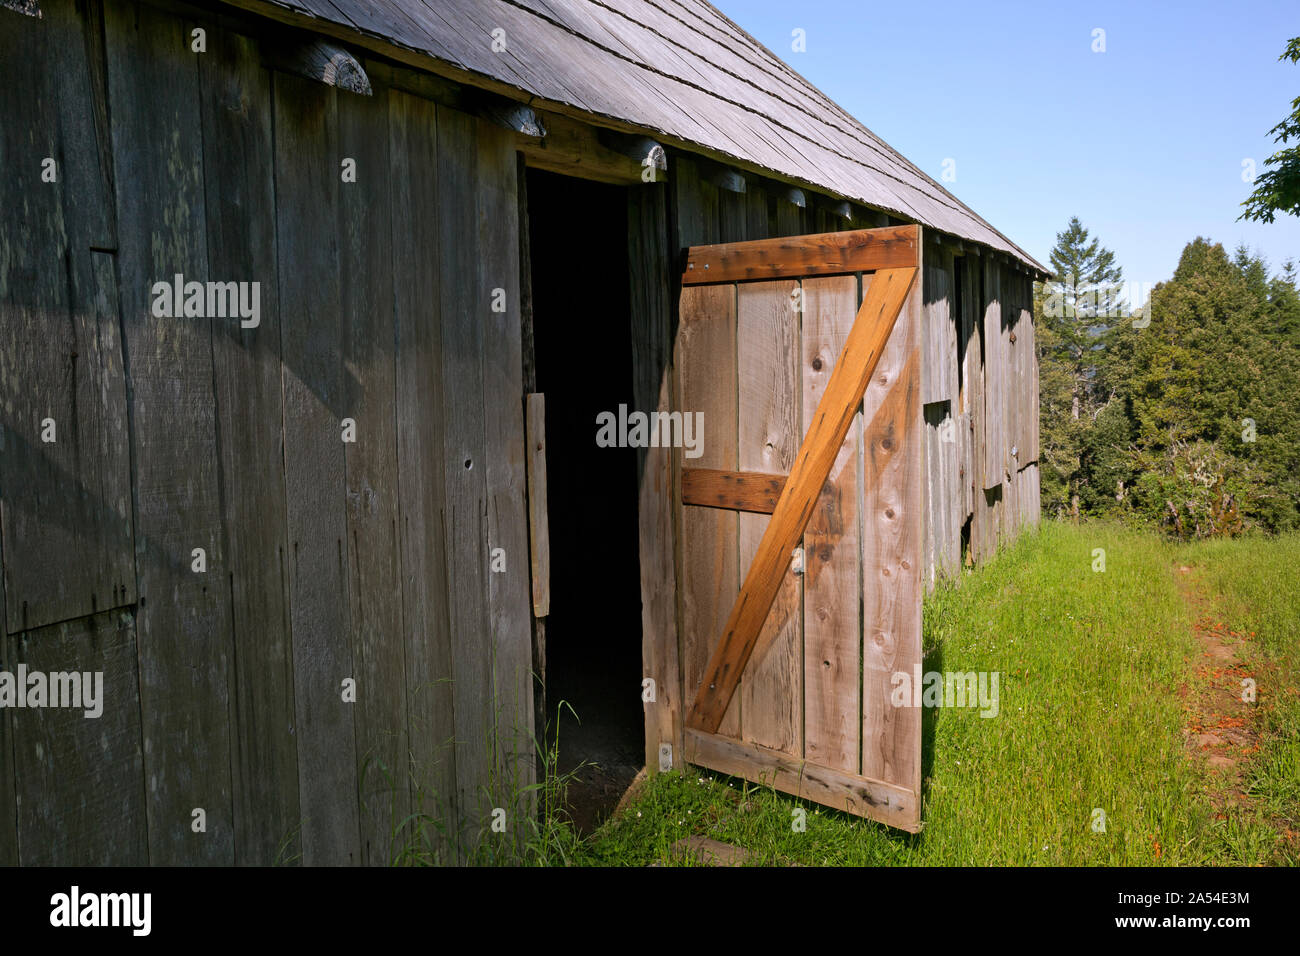 CA03723-00...CALIFORNIA - Replacement, replica, barn door at Lyons Ranch on the Bald Hills area of Redwoods National Park. Stock Photo